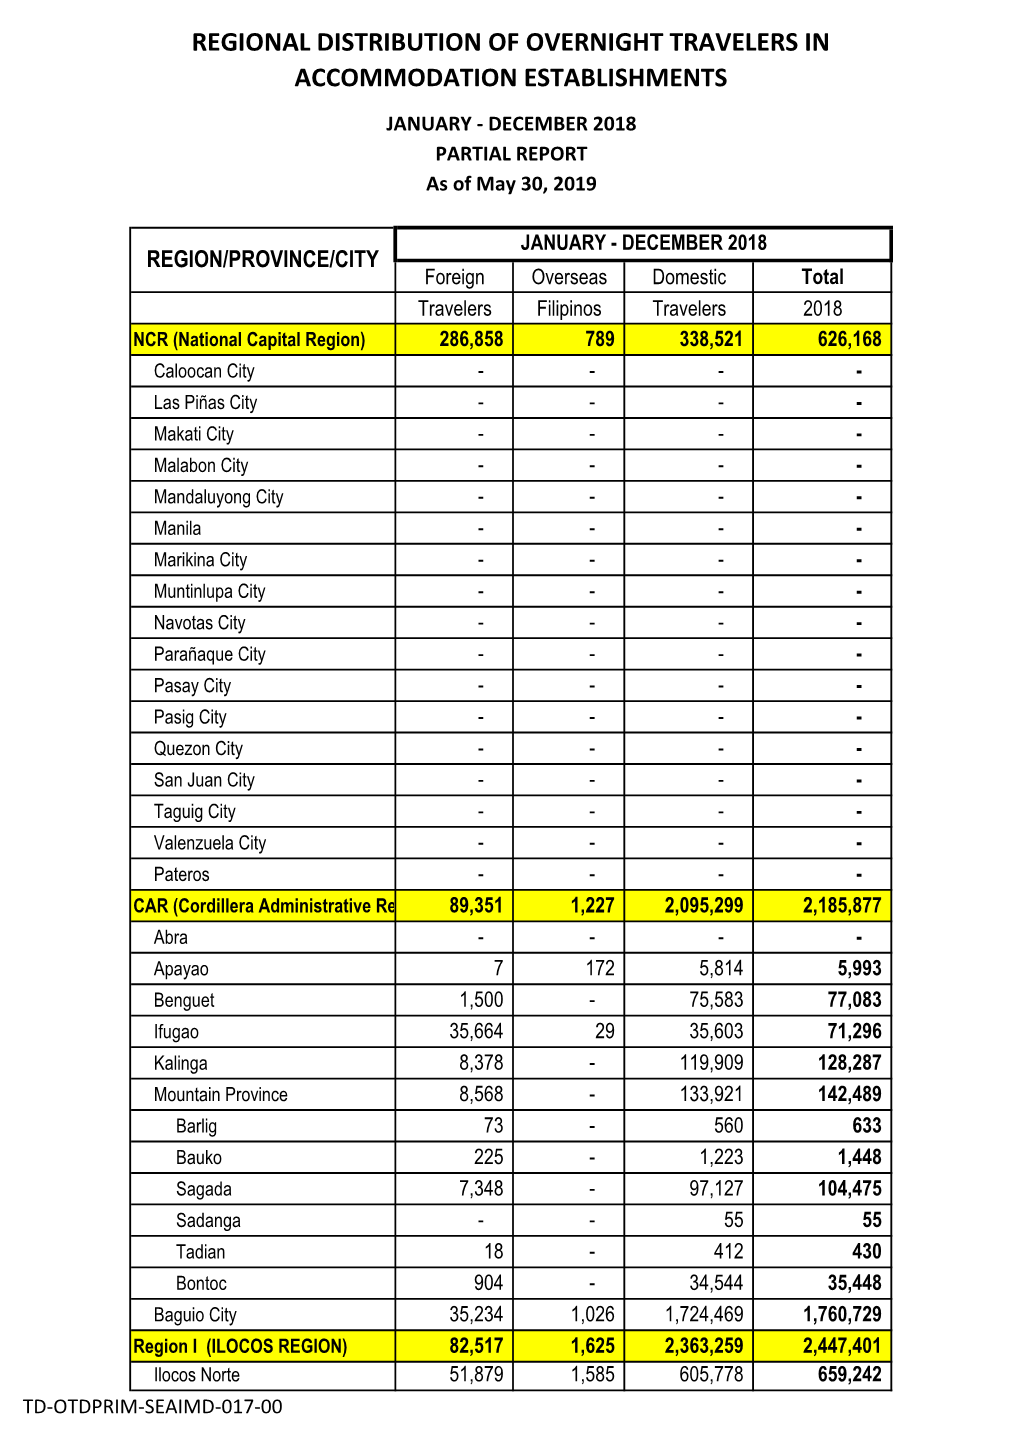 REGIONAL DISTRIBUTION of OVERNIGHT TRAVELERS in ACCOMMODATION ESTABLISHMENTS JANUARY - DECEMBER 2018 PARTIAL REPORT As of May 30, 2019